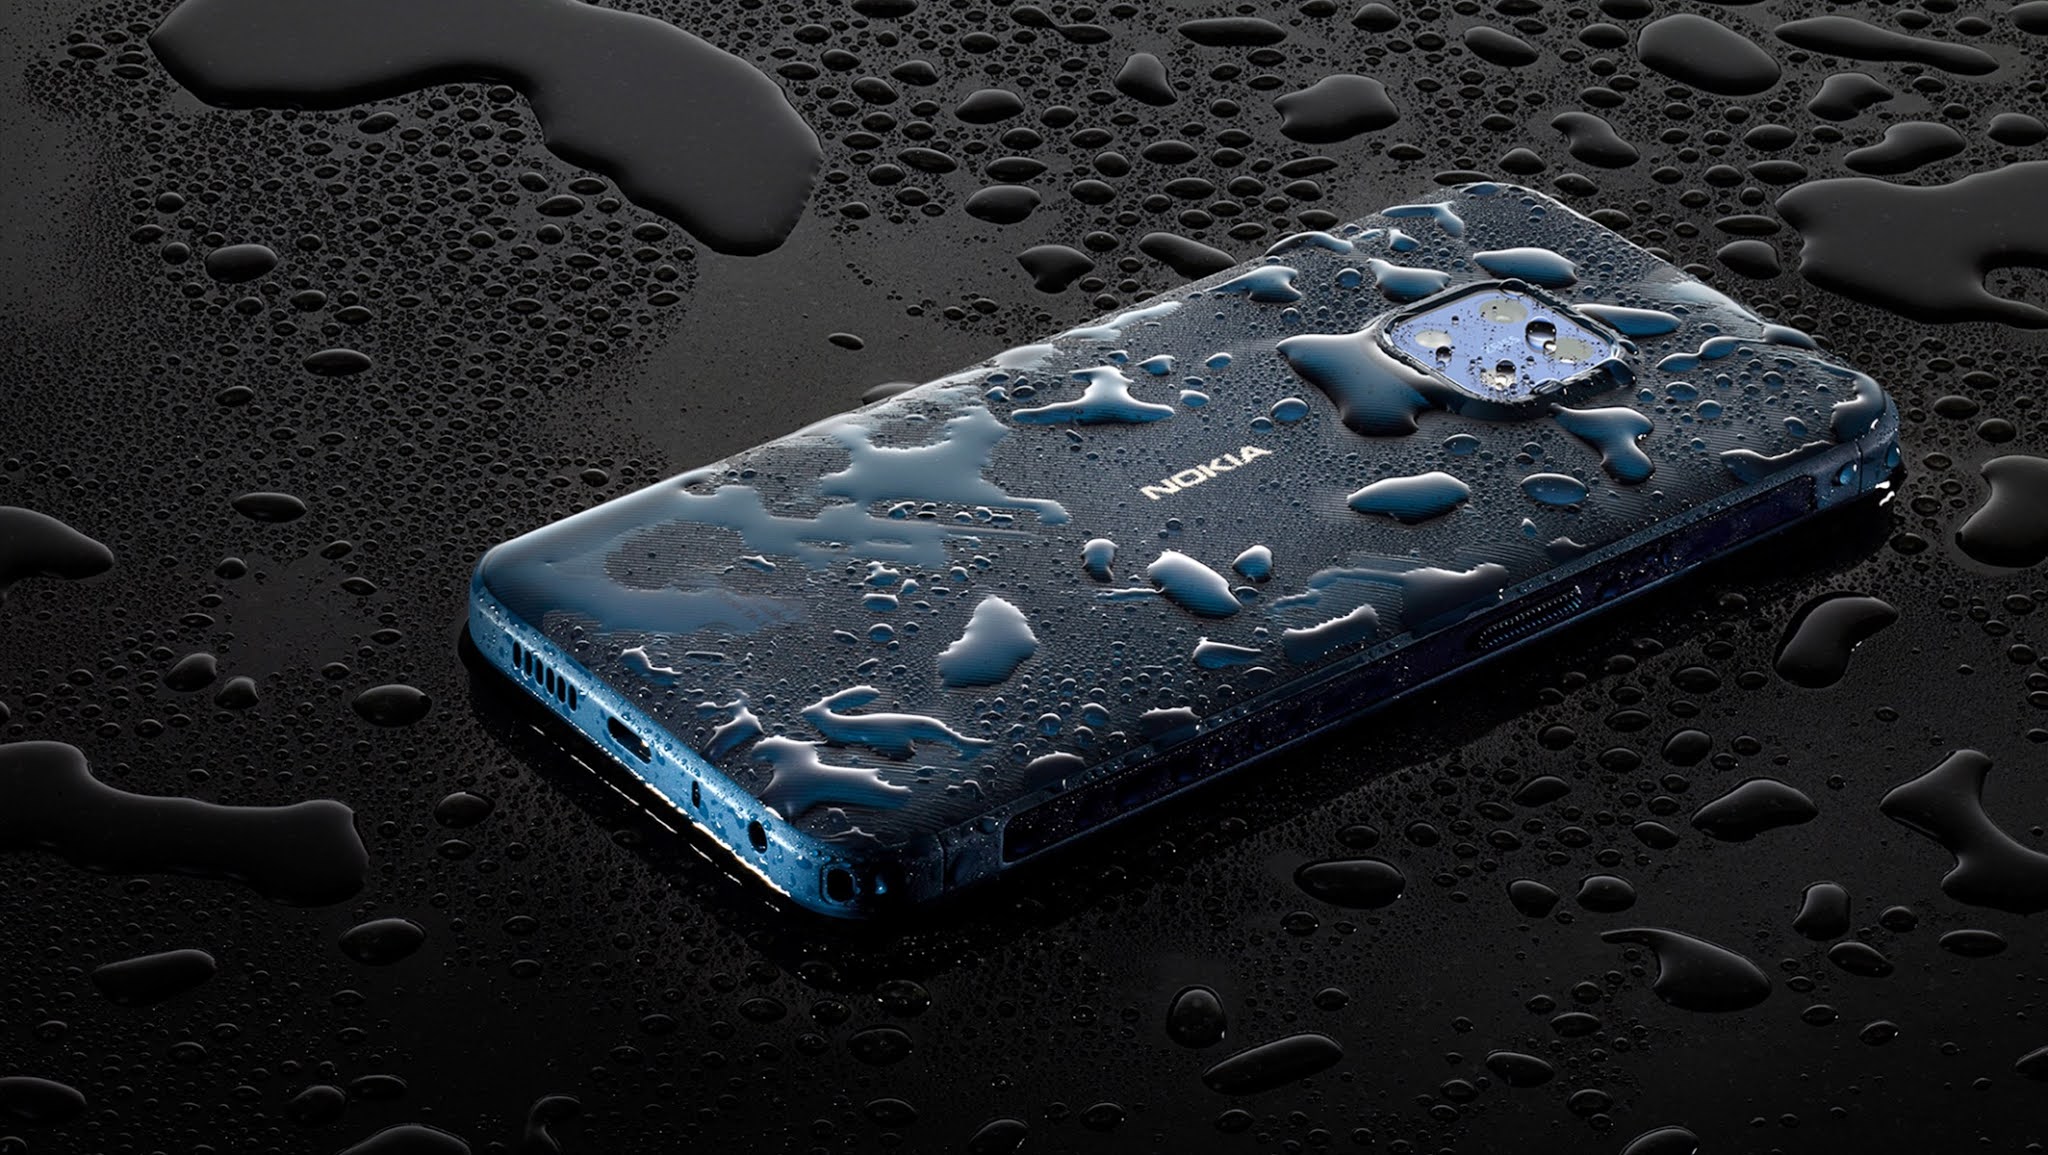 This is what Nokia XR20 will look like: a competitor to Motorola Defy 2021 with water and shock resistance